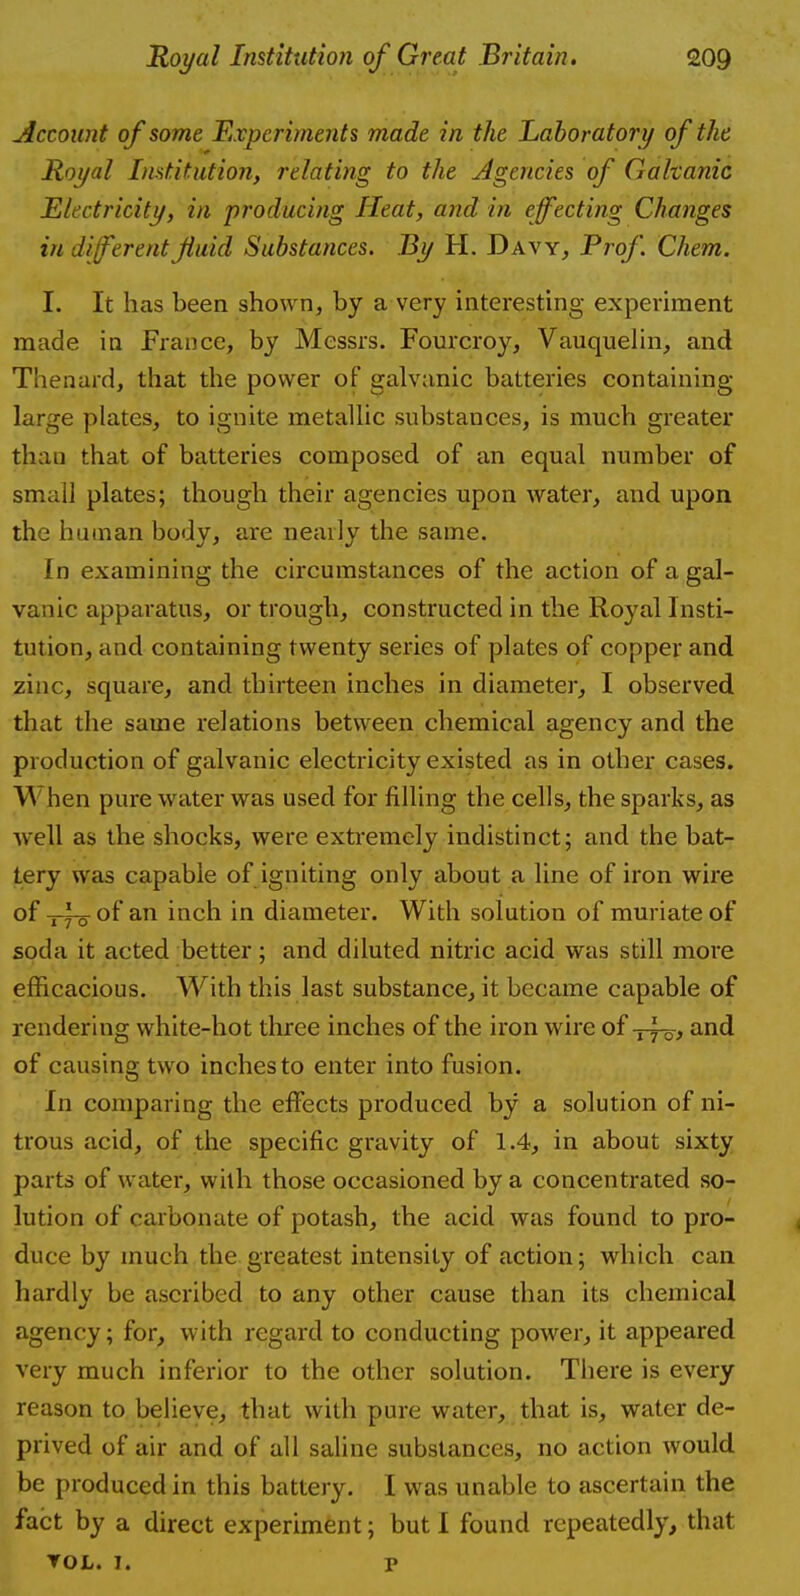 Account of some Experiments made in the Laboratory of the Royal Institution, relating to the Agencies of Galvanic Electricity, in producing Heat, and in effecting Changes in different fluid Substances. By H. Davy, Prof Chem. I. It has been shown, by a very interesting experiment made in France, by Messrs. Fourcroy, Vauquelin, and Thenard, that the power of galvanic batteries containing large plates, to ignite metallic substances, is much greater than that of batteries composed of an equal number of smail plates; though their agencies upon water, and upon the human body, are nearly the same. In examining the circumstances of the action of a gal- vanic apparatus, or trough, constructed in the Royal Insti- tution, and containing twenty series of plates of copper and zinc, square, and thirteen inches in diameter, I observed that the same relations between chemical agency and the production of galvanic electricity existed as in other cases. \A hen pure water was used for filling the cells, the sparks, as well as the shocks, were extremely indistinct; and the bat- tery was capable of igniting only about a line of iron wire of-pfo of an inch in diameter. With solution of muriate of soda it acted better; and diluted nitric acid was still more efficacious. With this last substance, it became capable of rendering white-hot three inches of the iron wire of -y-fo, and of causing two inches to enter into fusion. In comparing the effects produced by a solution of ni- trous acid, of the specific gravity of 1.4, in about sixty parts of water, with those occasioned by a concentrated so- lution of carbonate of potash, the acid was found to pro- duce by much the greatest intensity of action; which can hardly be ascribed to any other cause than its chemical agency; for, with regard to conducting power, it appeared very much inferior to the other solution. There is every reason to believe, that with pure water, that is, water de- prived of air and of all saline substances, no action would be produced in this battery. I was unable to ascertain the fact by a direct experiment; but I found repeatedly, that TOL. 7. P